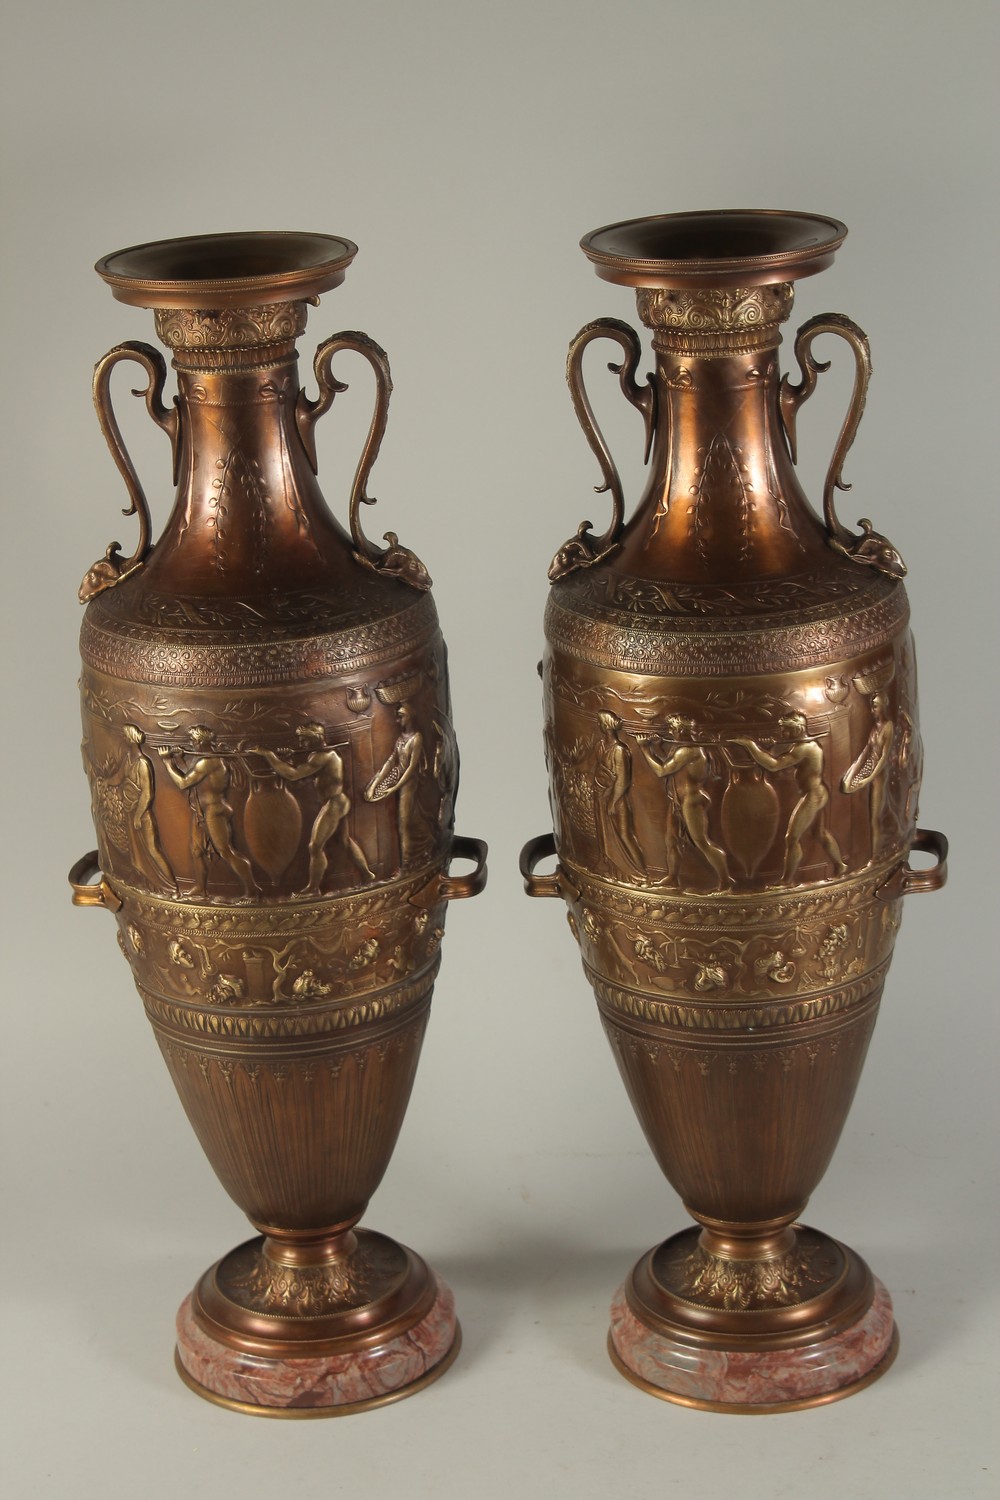 A SUPERB PAIR OF TWO-HANDLED CLASSICAL BRONZE URNS decorated with panels of classical figures. - Image 4 of 4